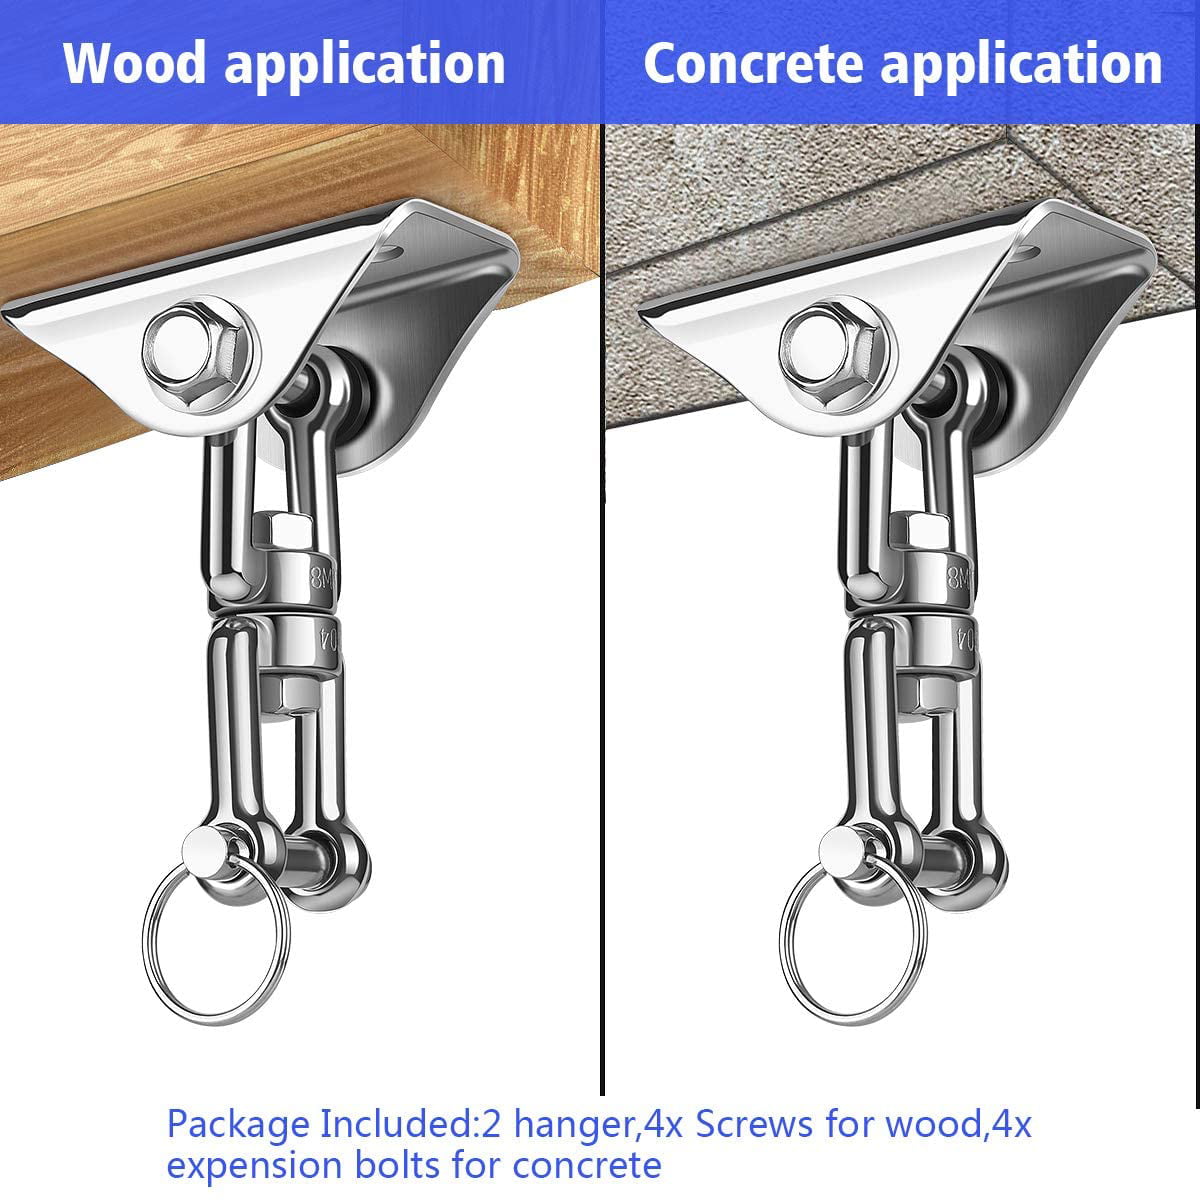 Awroutdoor Heavy Duty Swing Hangers Suspension Hooks 1000LB Capacity,180°Rotate Swing Hooks with 4 Screw/ 4 Expansion Bolts for Concrete Wooden Set Porch Yoga Hammock Chair Sandbag Swing Sets Indoor 